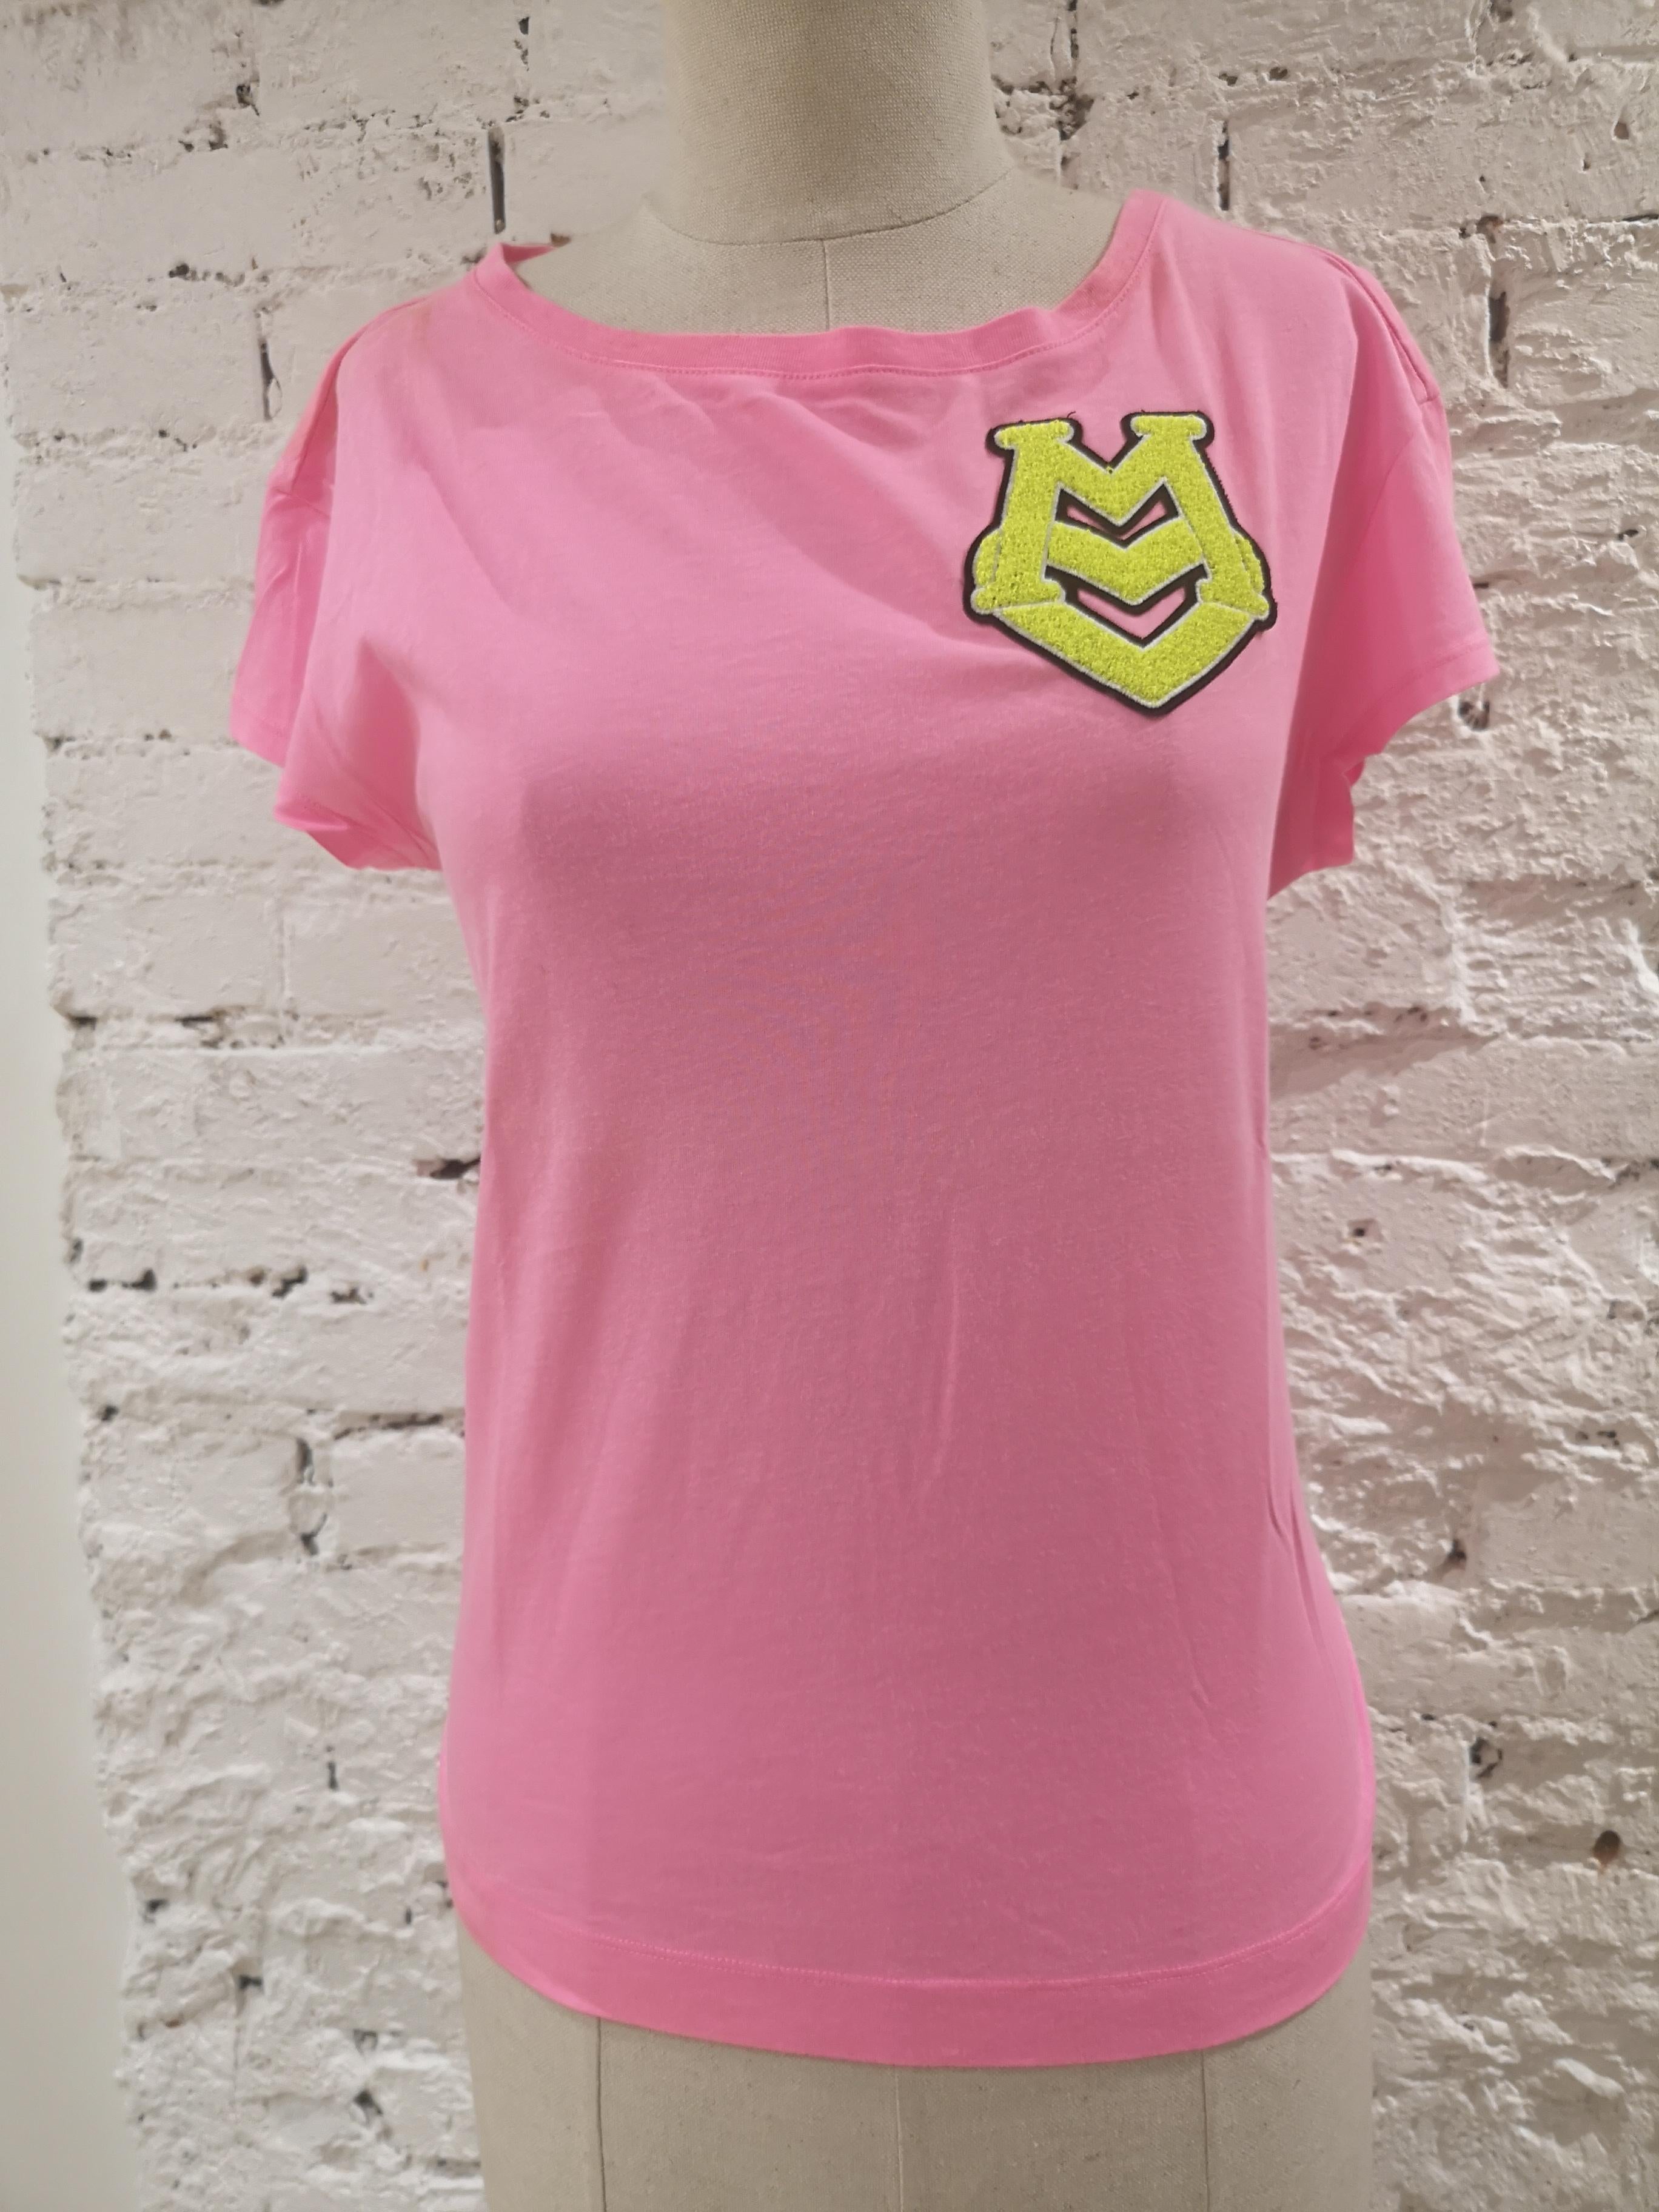 Moschino pink t-shirt
totally made in italy in size 44
total lenght 57 cm
a stain on the left side